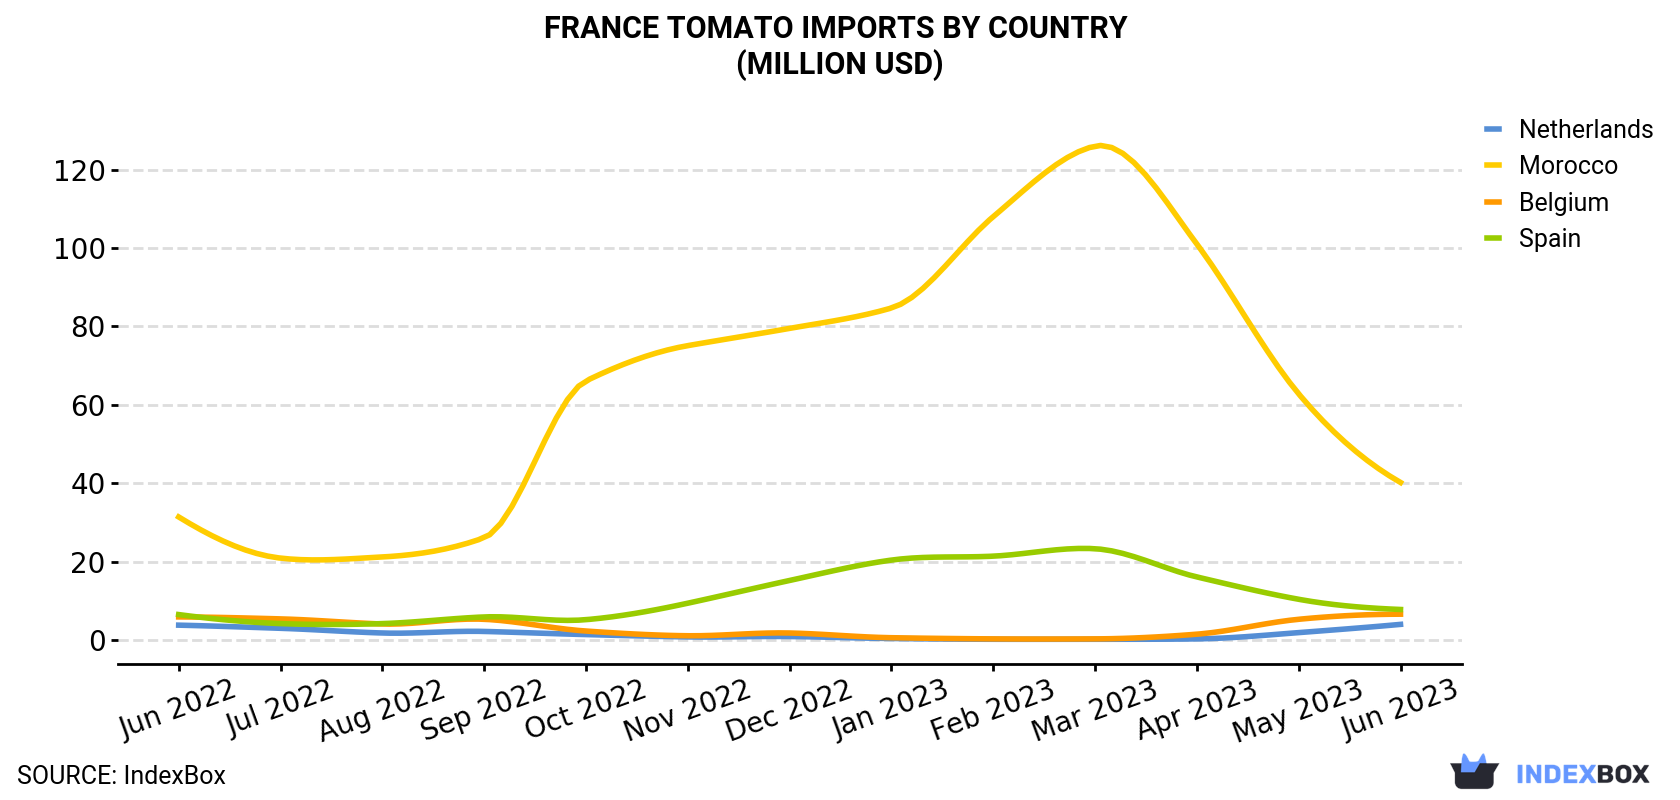 France Tomato Imports By Country (Million USD)